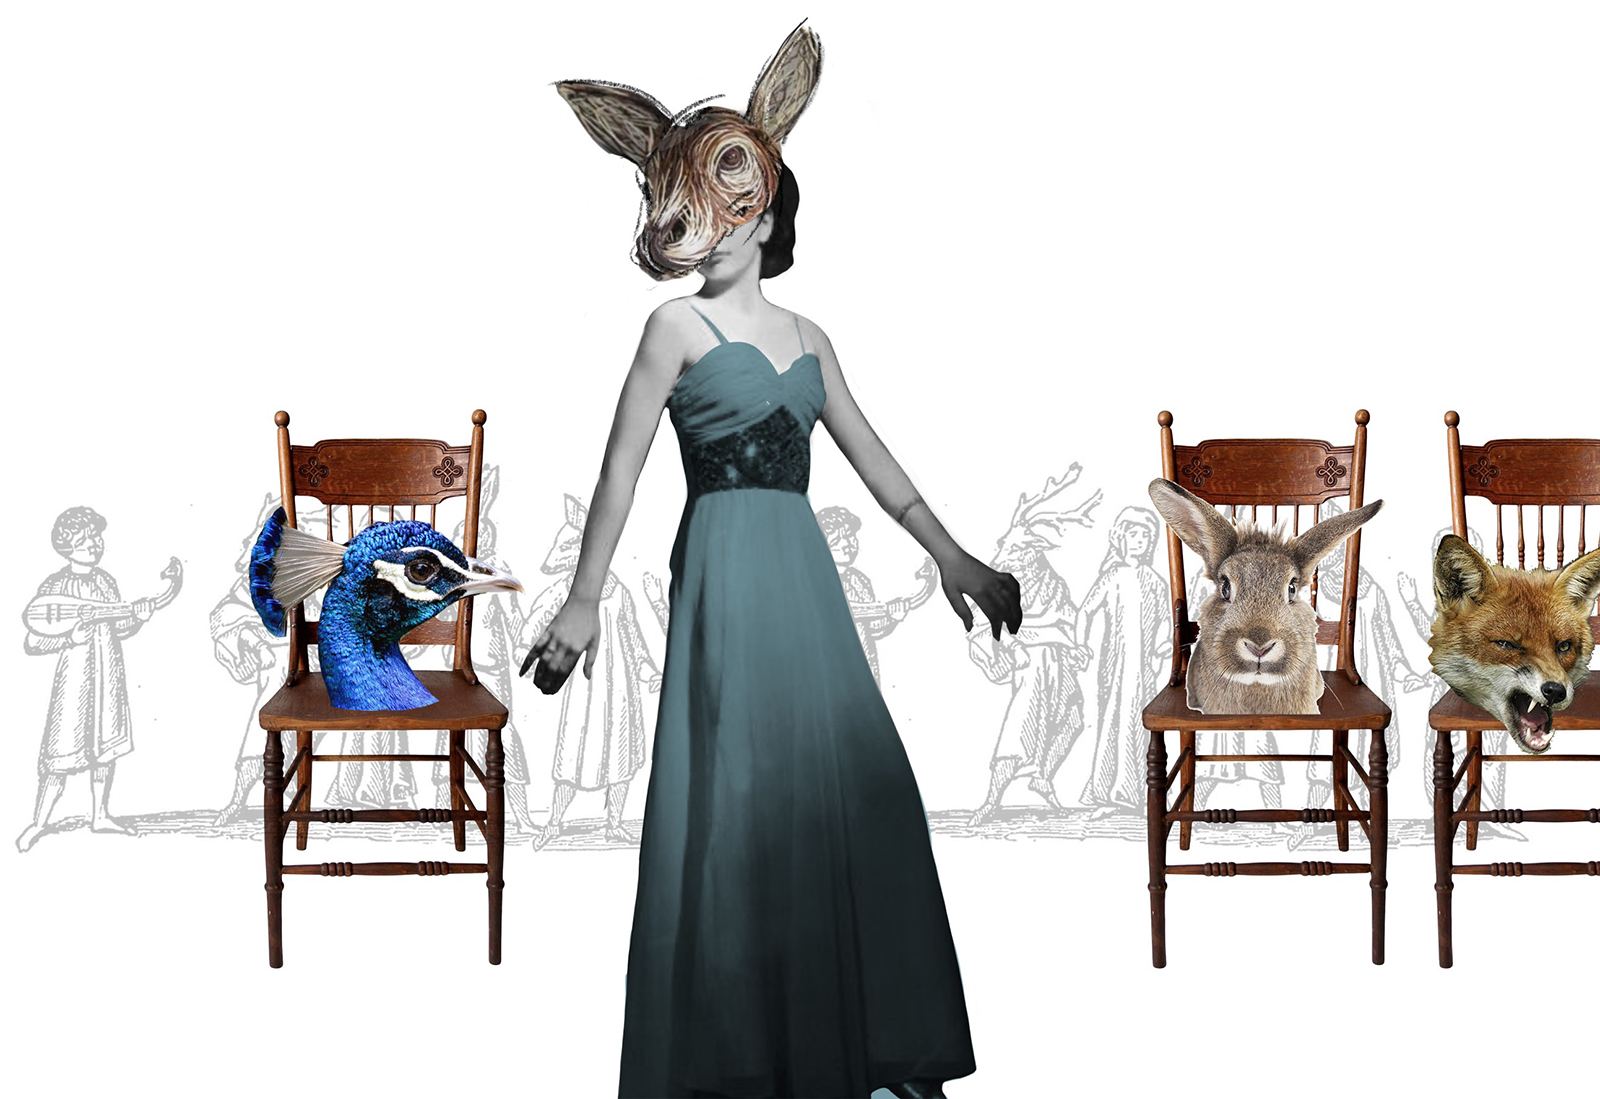 A costume design sketch of a female character wearing a blue party dress with a donkey mask on their head. Behind them sit a peacock and hare mask on chairs.